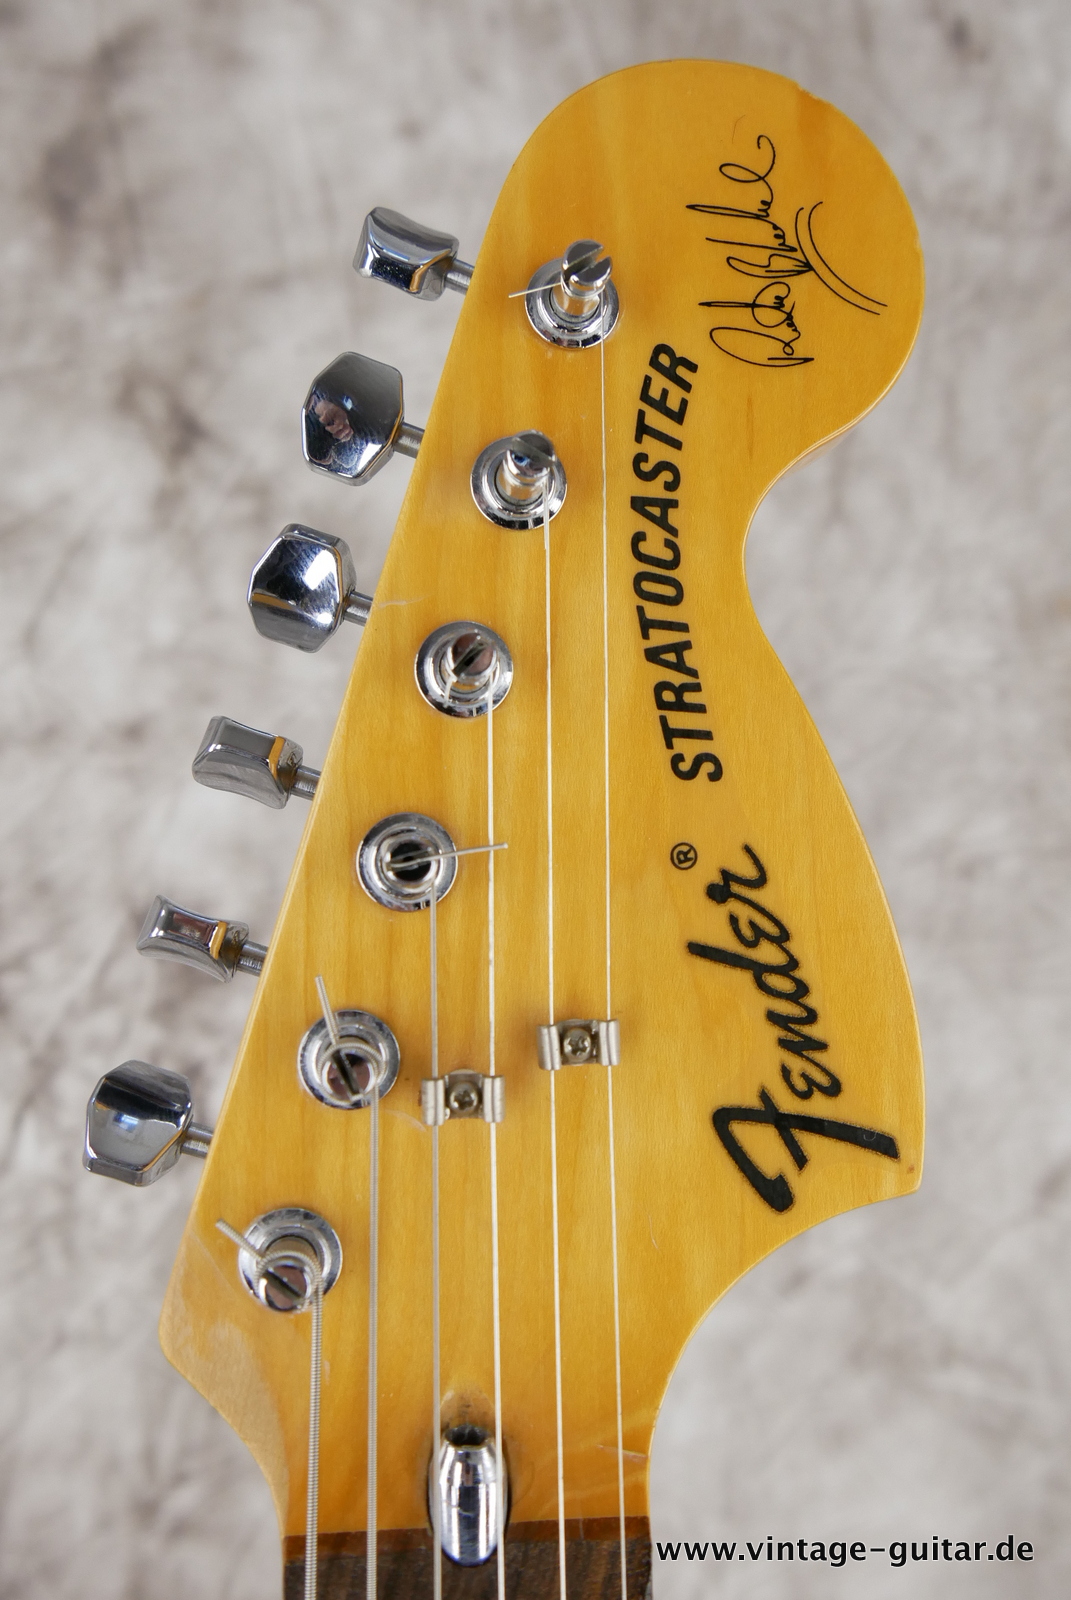 Fender_Strat_Stratocaster_Ritchie_Blackmore_ST-72RB_madeinjapan_1997_olympic_white_singed_scalloped_fretboard-009.JPG